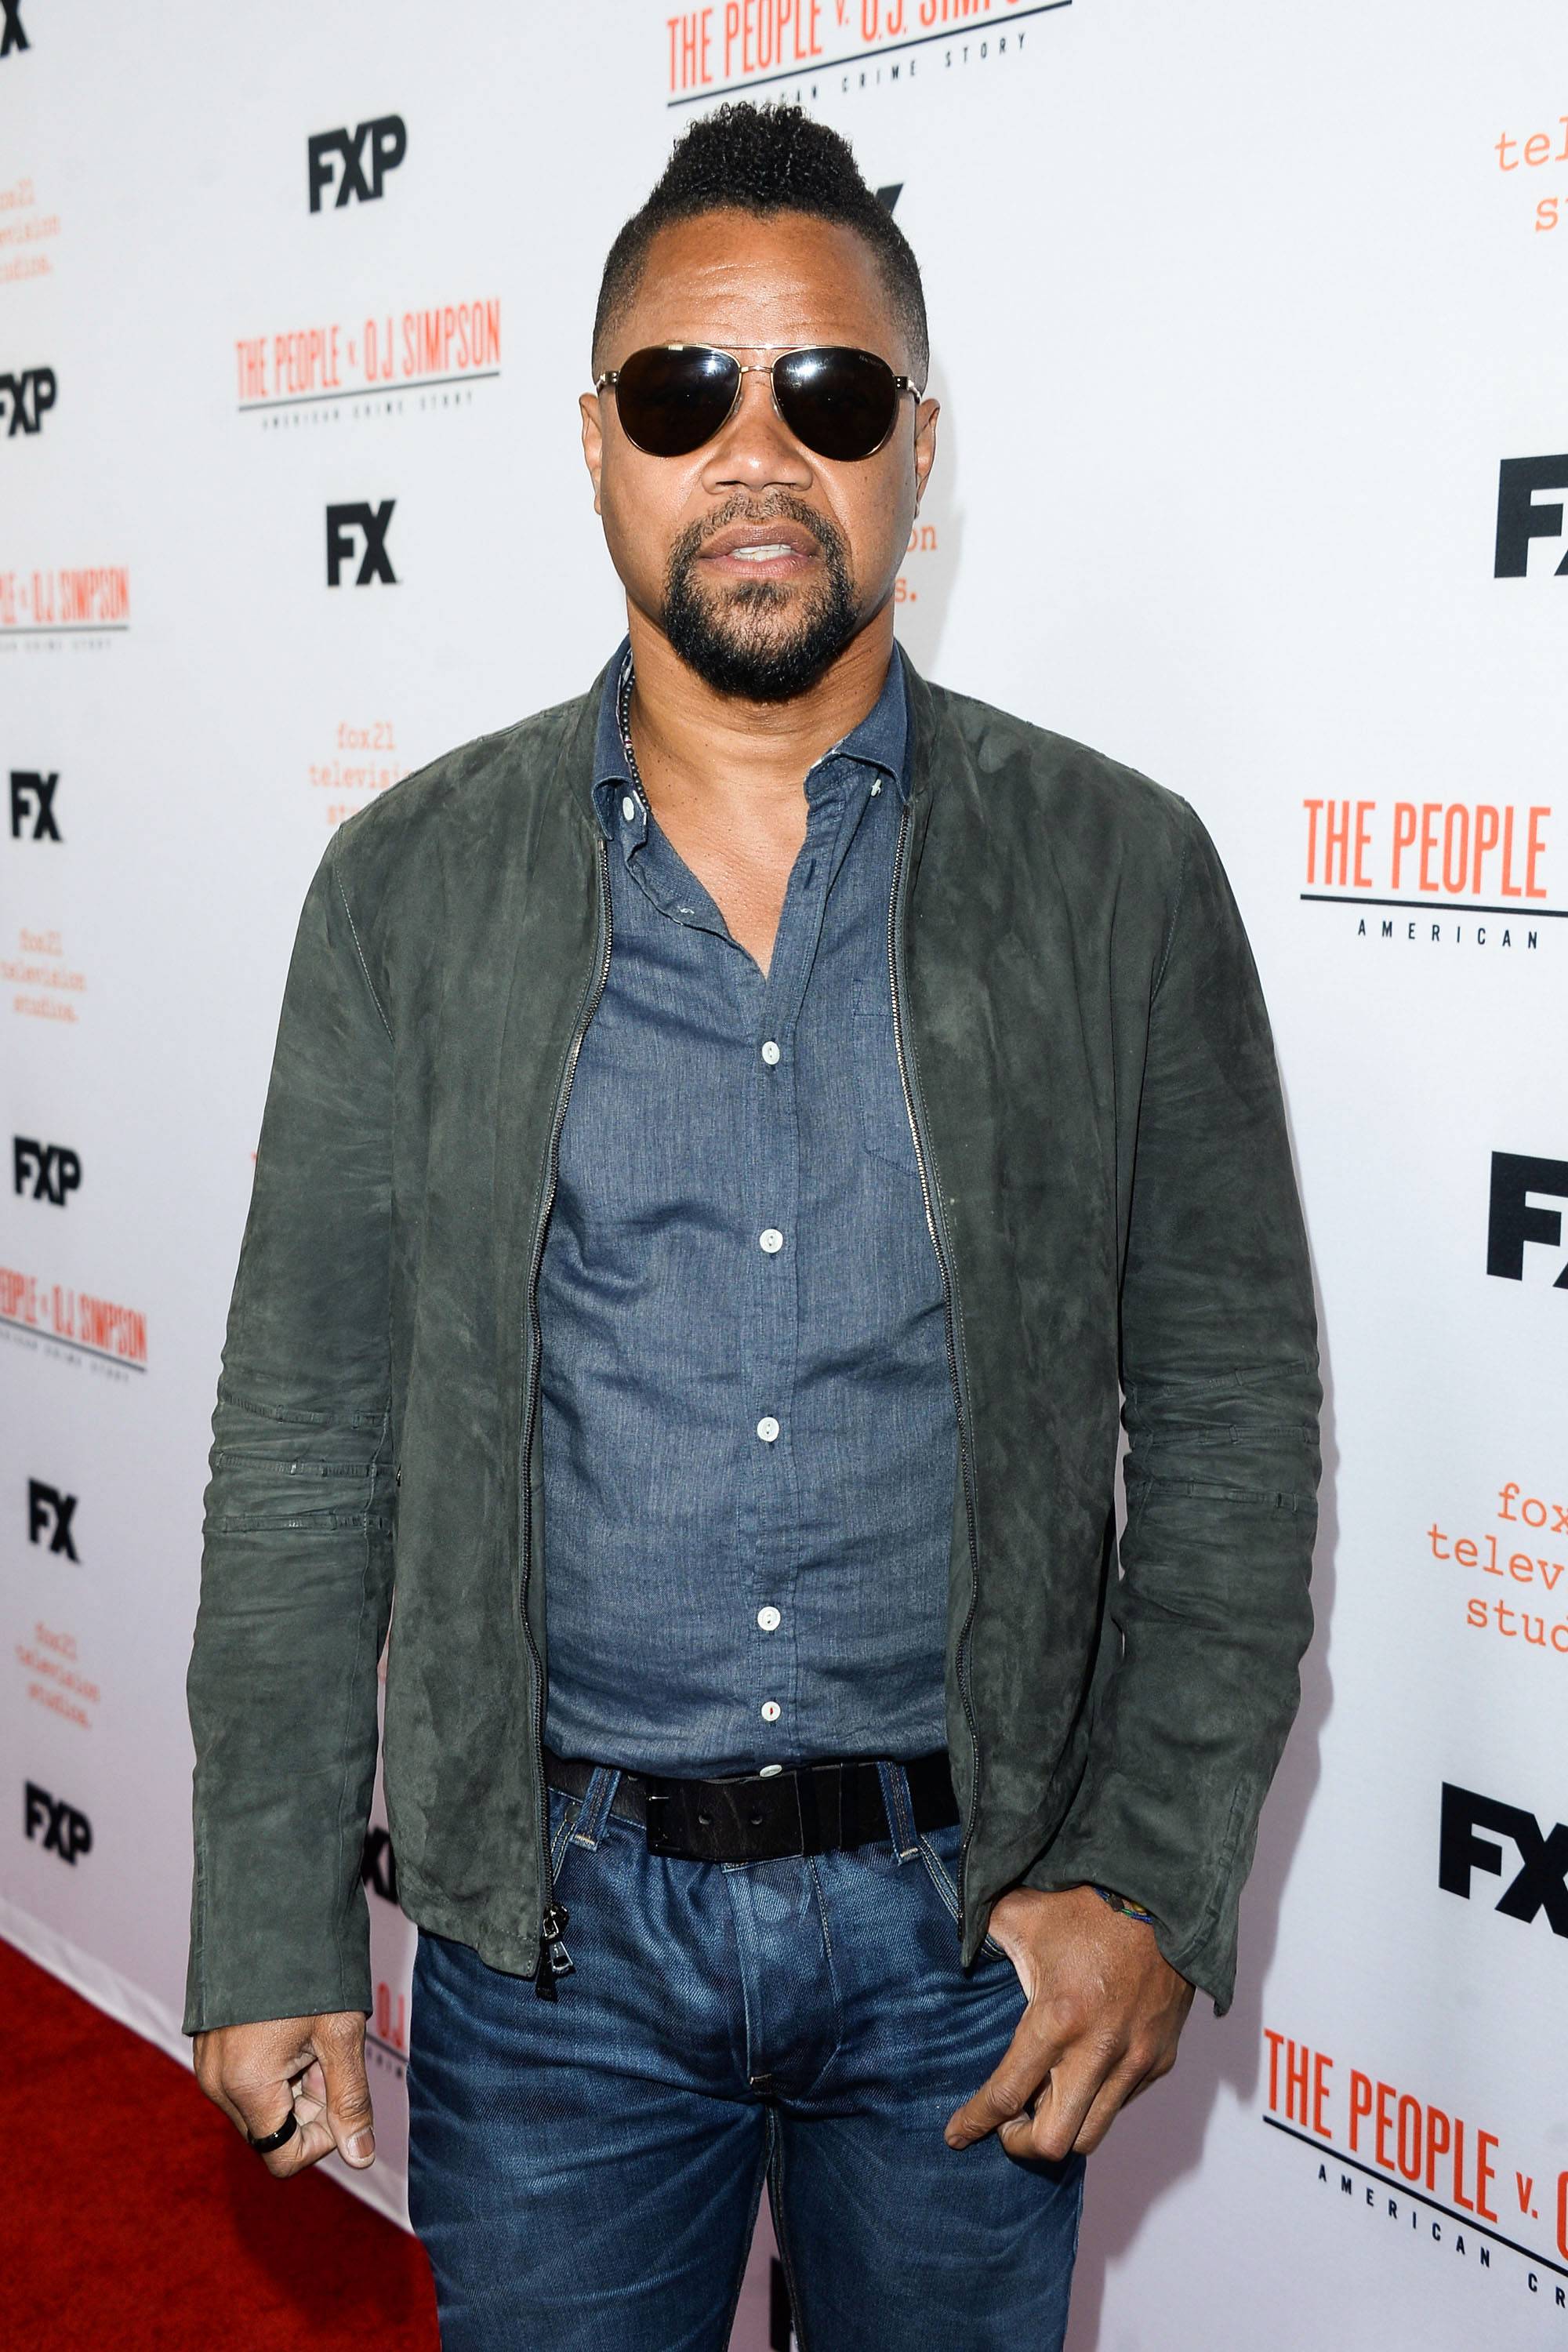 LOS ANGELES, CALIFORNIA - APRIL 04:  Actor Cuba Gooding, Jr. arrives at FX's For Your Consideration Event for "The People v. O.J. Simpson - American Crime Story" at The Theatre at Ace Hotel on April 4, 2016 in Los Angeles, California.  (Photo by Matt Winkelmeyer/Getty Images)